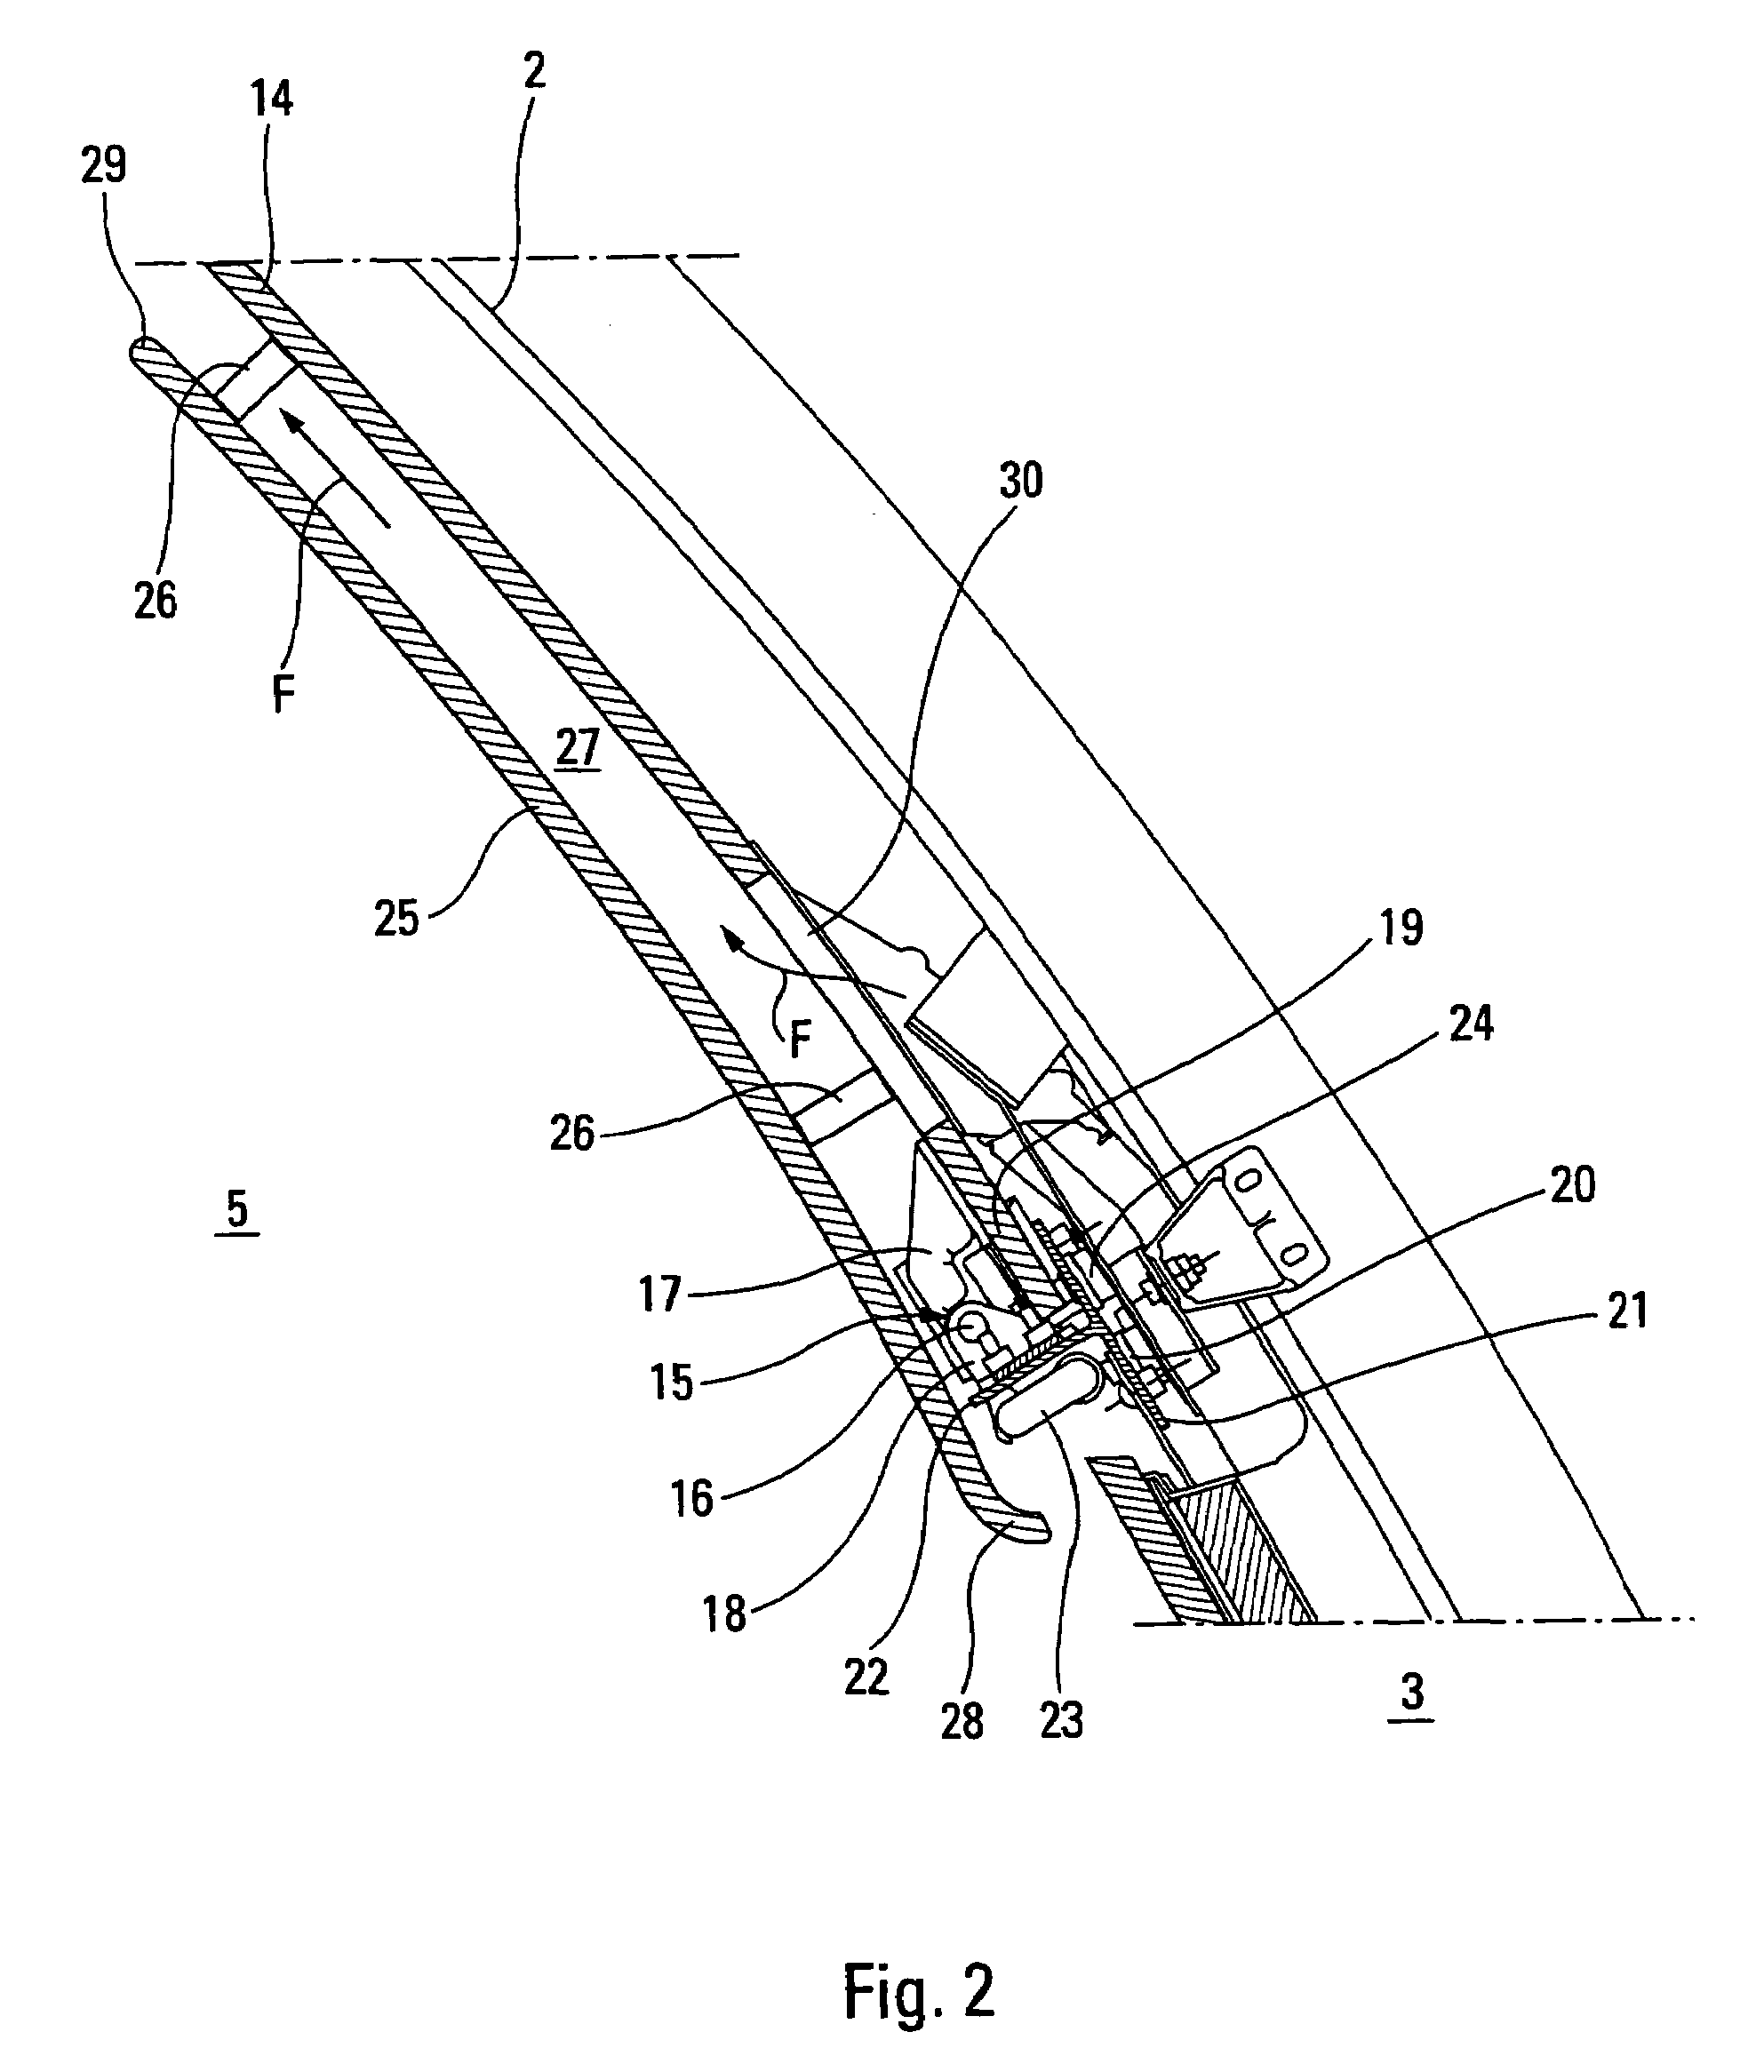 Internal arrangement of the walls of the fuselage of an aircraft